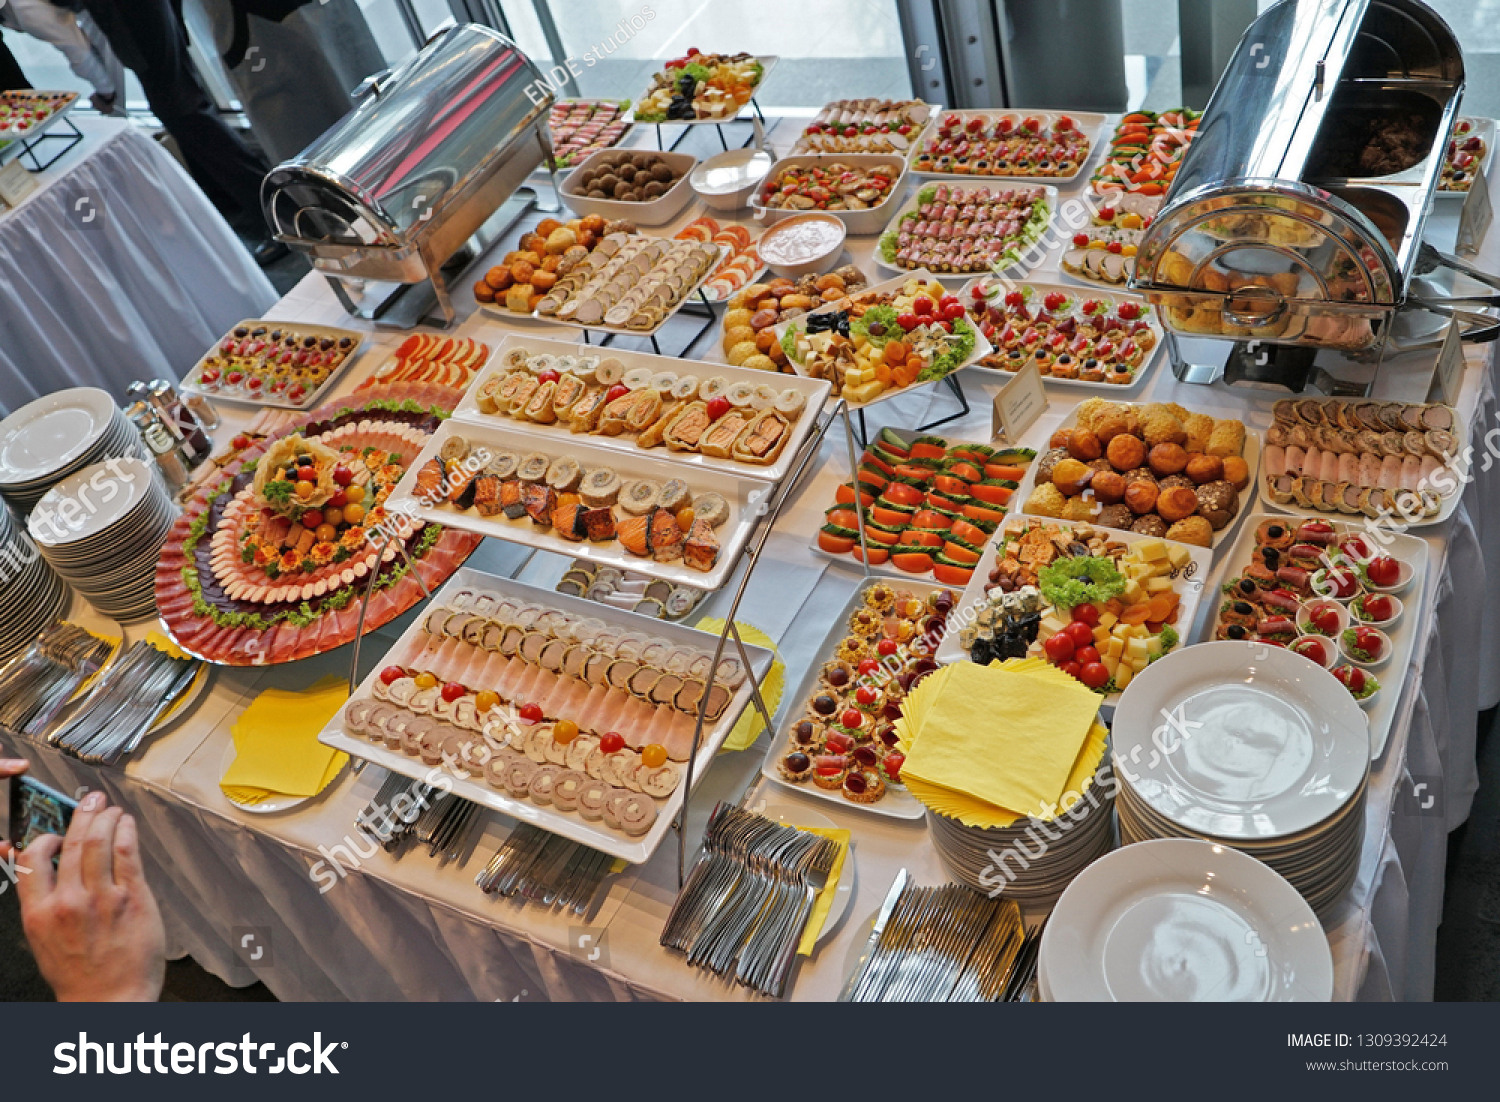 equal lonely dome Catering Buffet Table Delicious Food Events Stock Photo 1309392424 |  Shutterstock